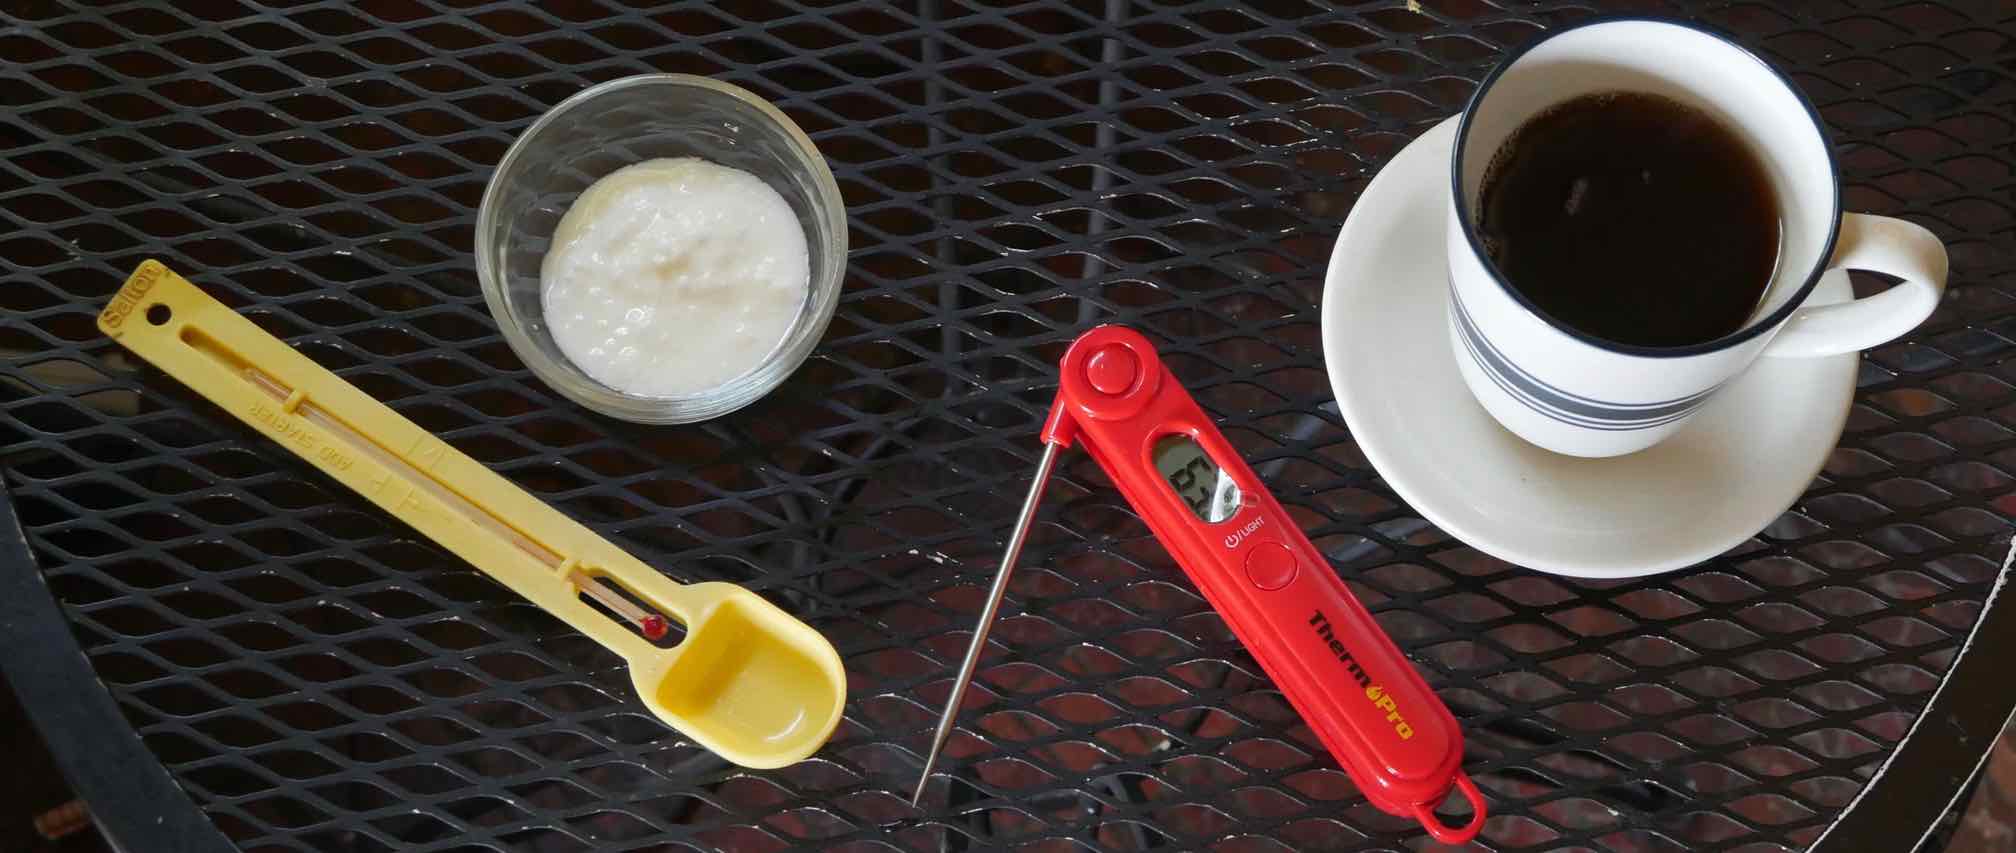 a measuring spoon themometer, a small dish of yougurt starter, a digital thermometer and a cup of hot tea in a blue and white mug.